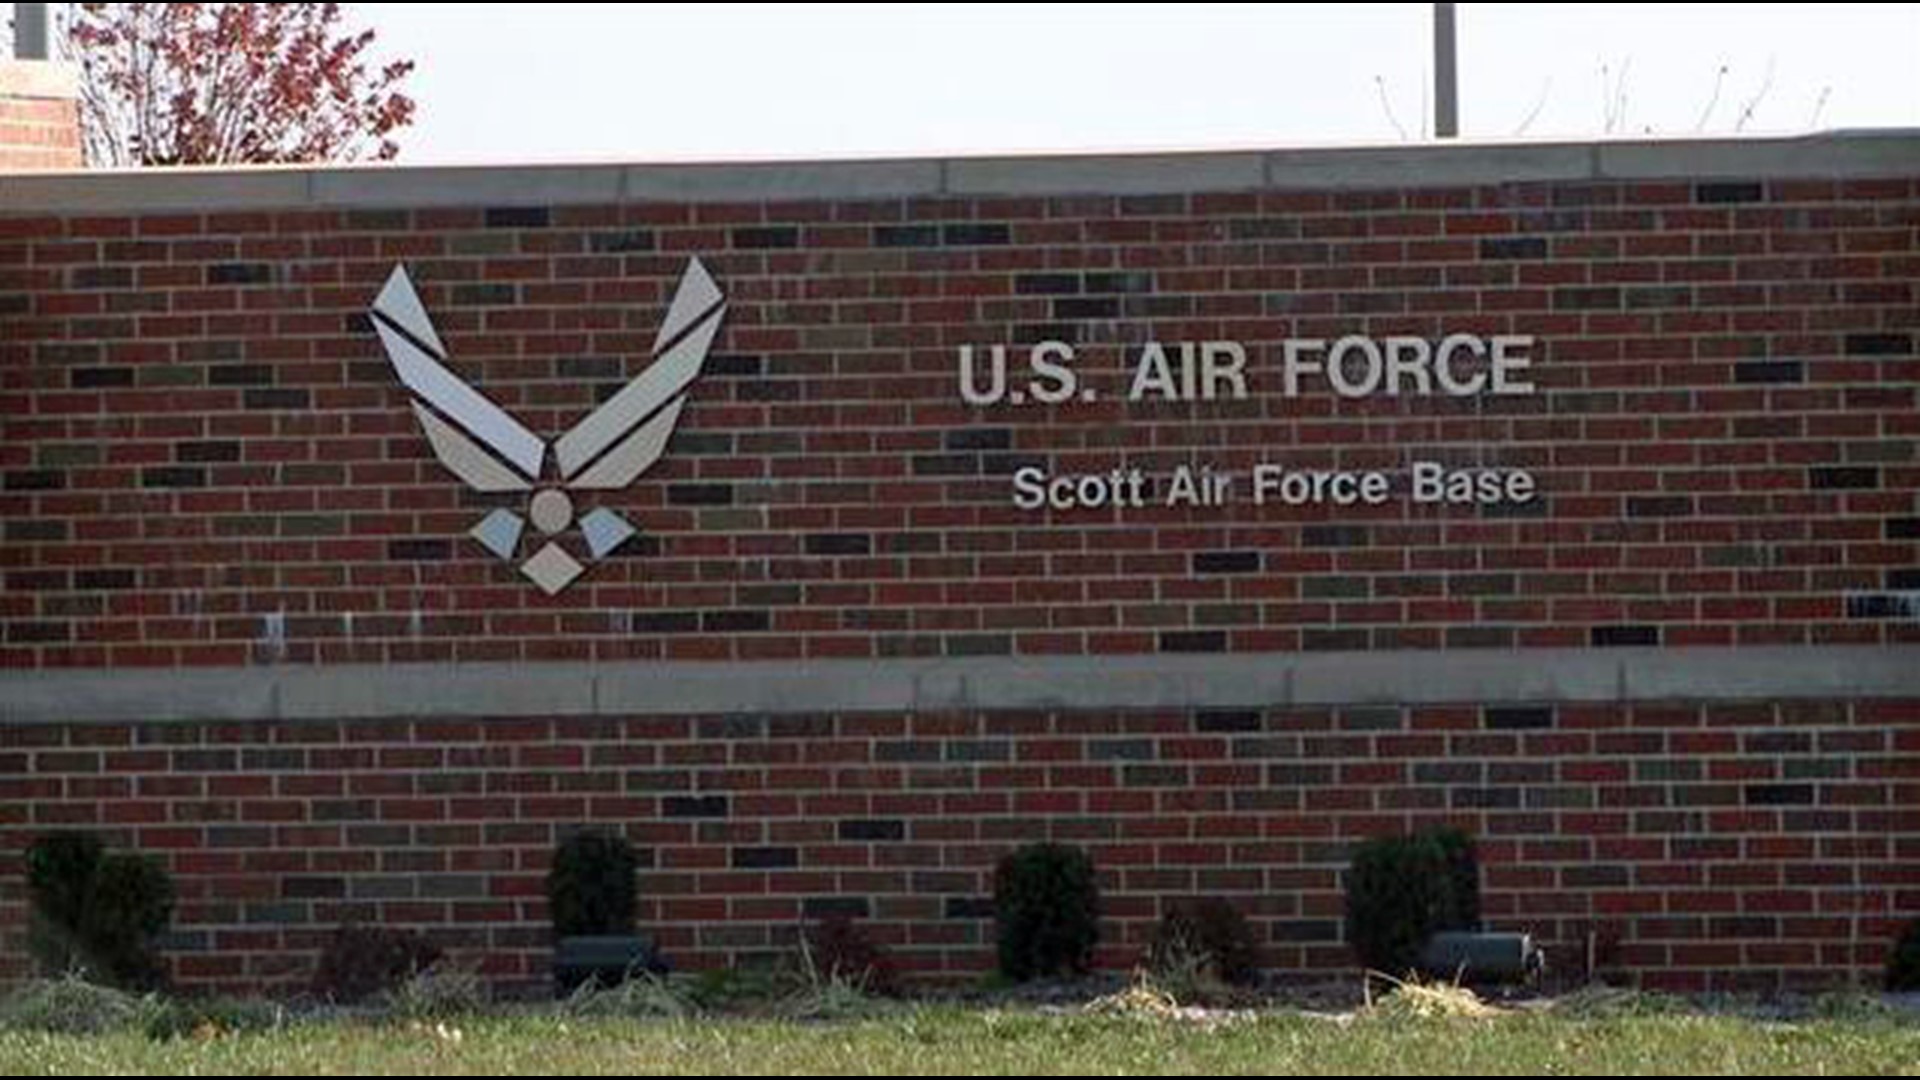 Officials found no explosive device at Scott Air Force Base after a dog alerted personnel during a vehicle search. The original alert happened at about 9 a.m.